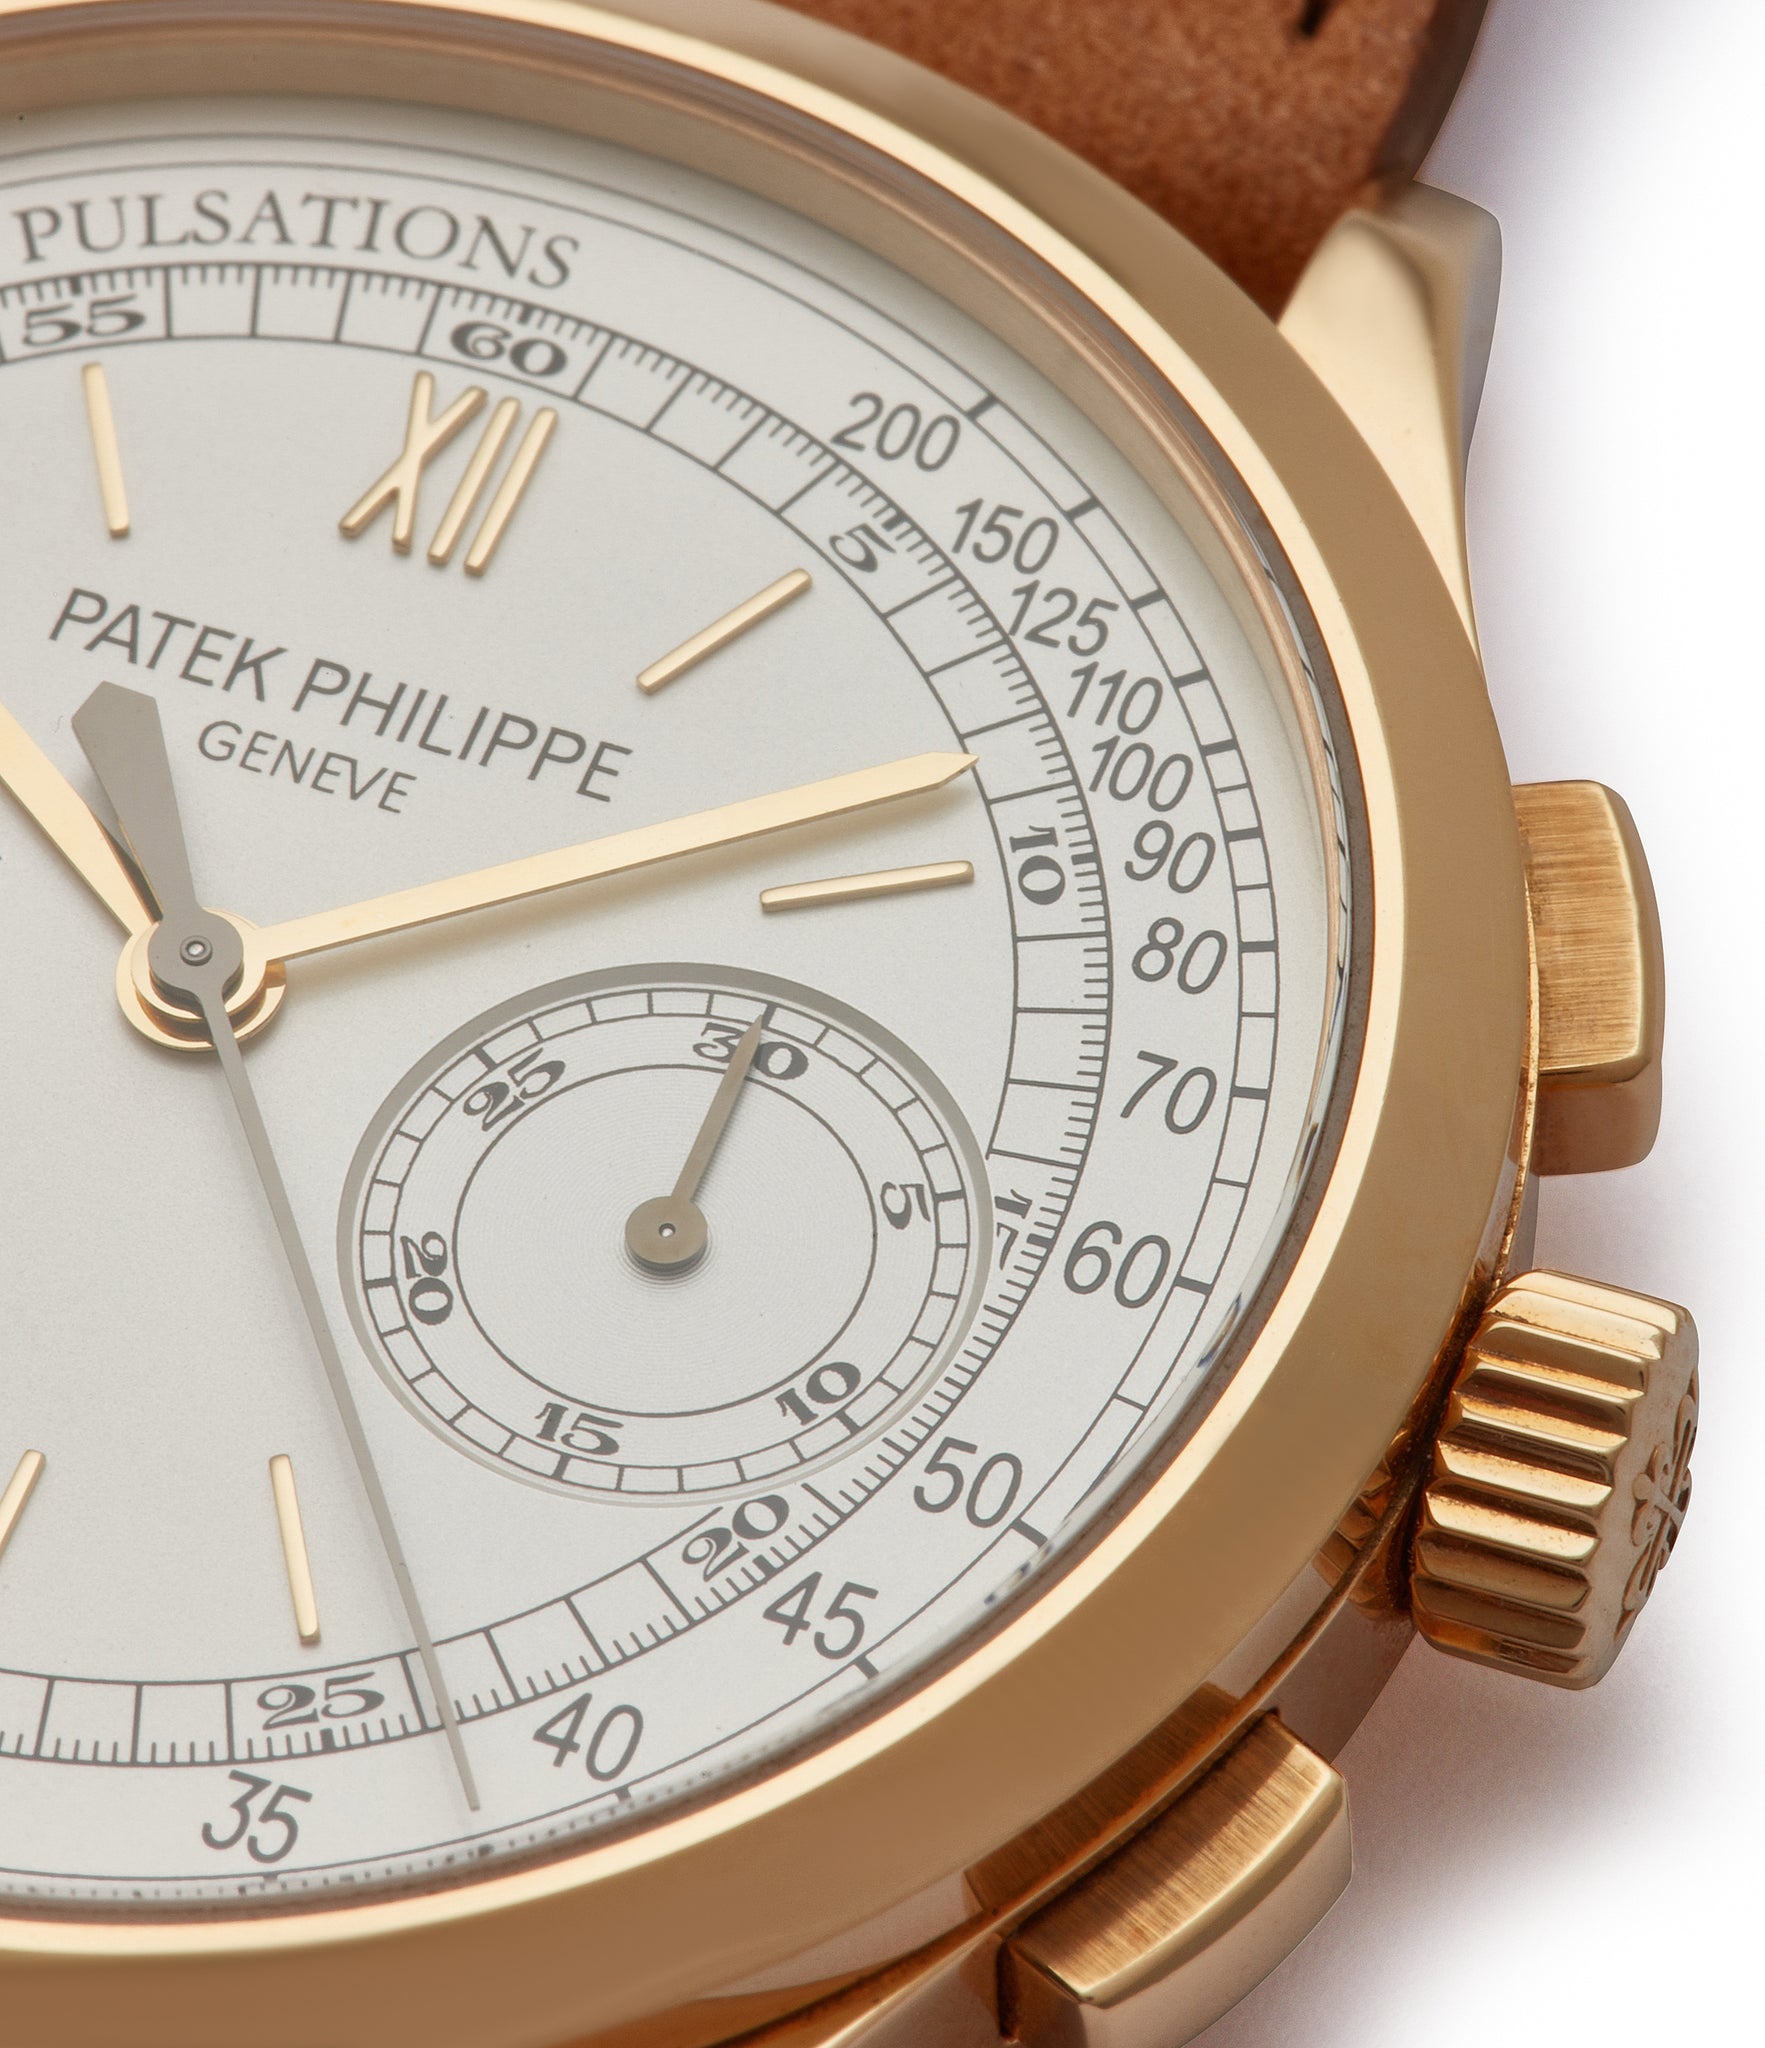 silver dial 5170 Patek Philippe Chronograph yellow gold dress pre-owned watch for sale online at A Collected Man London UK specialist of rare watches